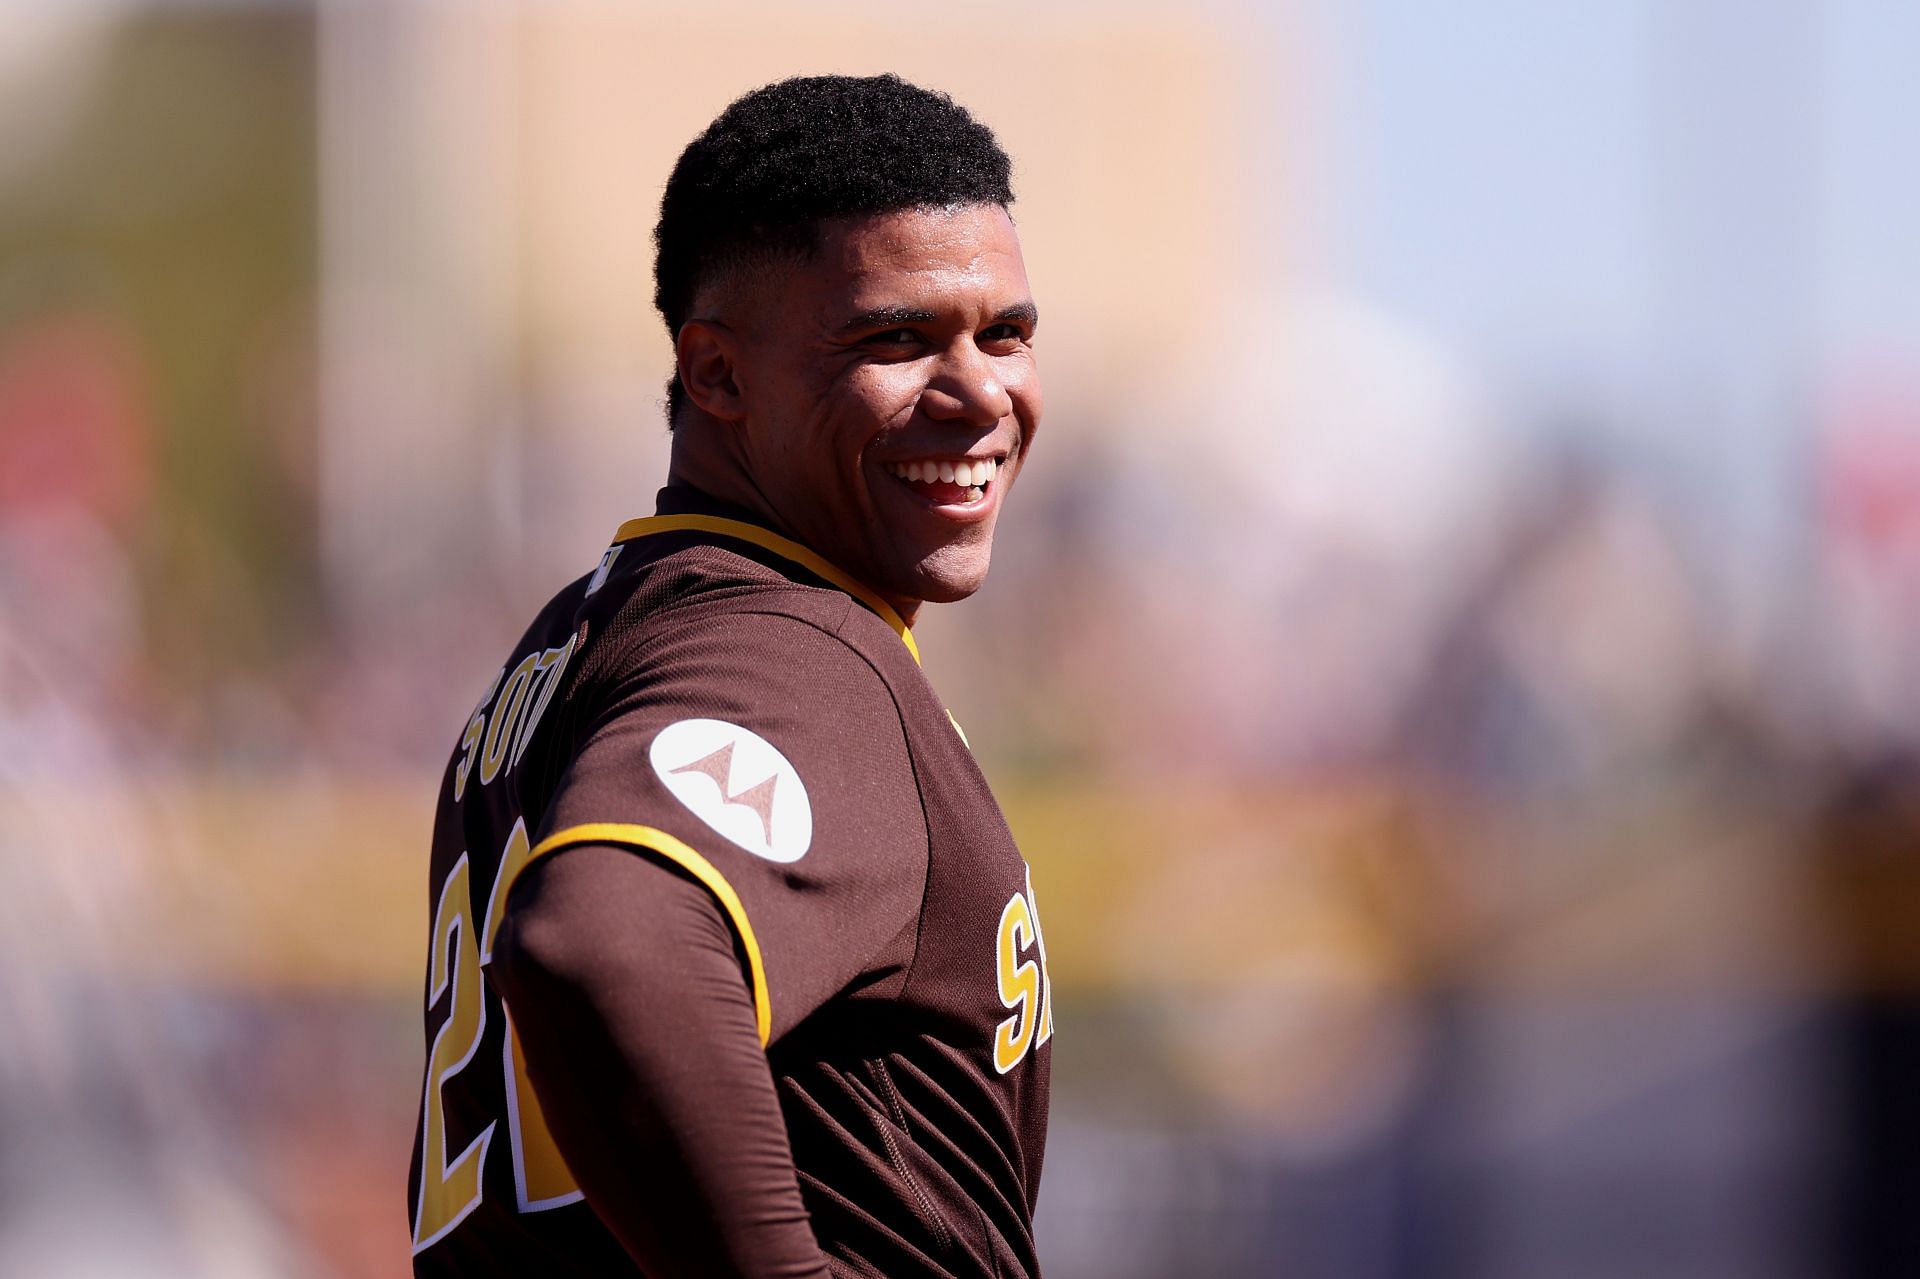 Juan Soto believes the San Diego Padres have everything to win a